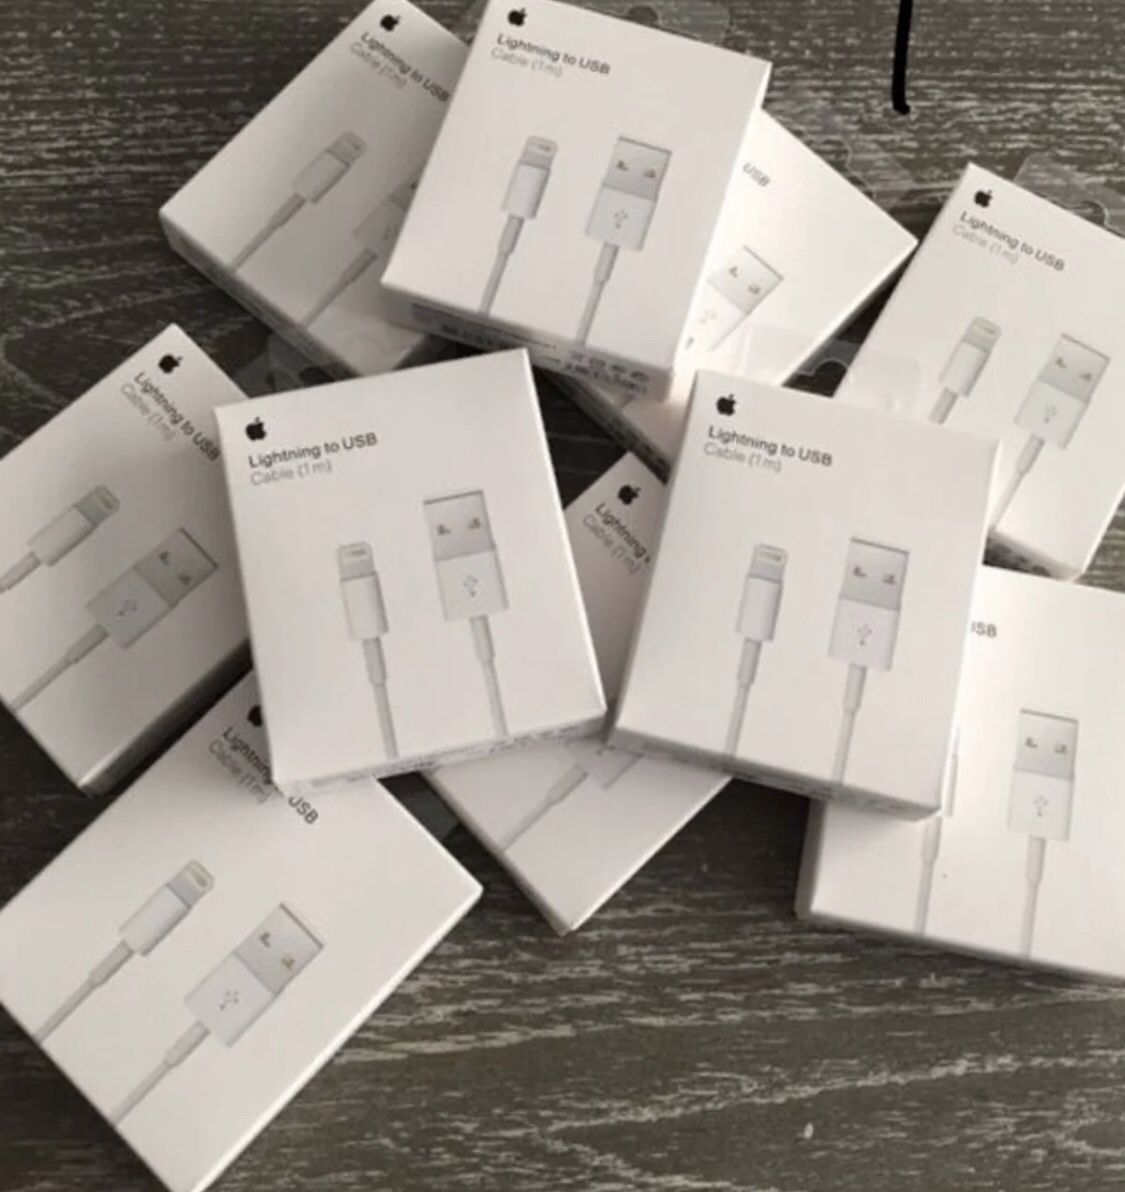 6 Original iPhone Apple Chargers